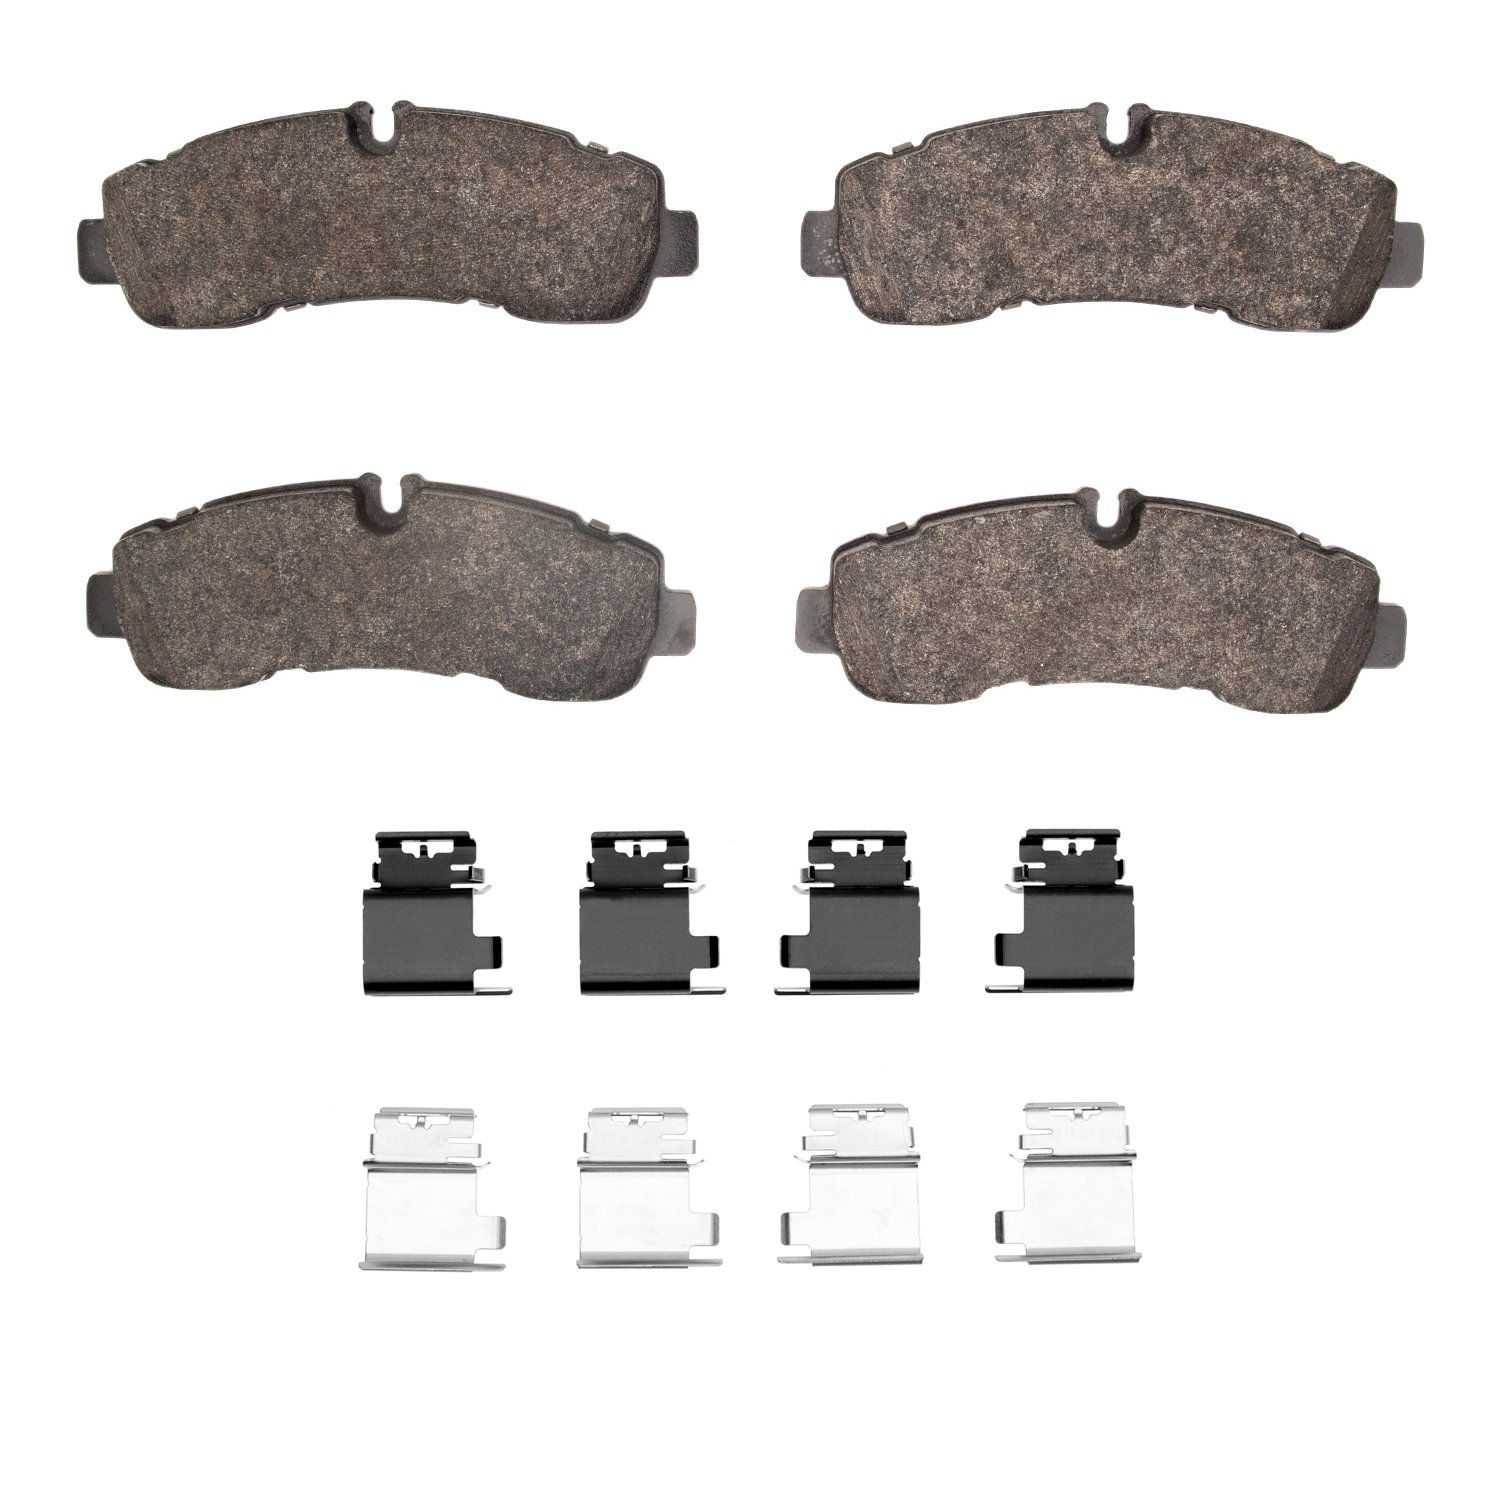 Super-Duty Brake Pads & Hardware Kit, Fits Select Ford/Lincoln/Mercury/Mazda, Position: Rear